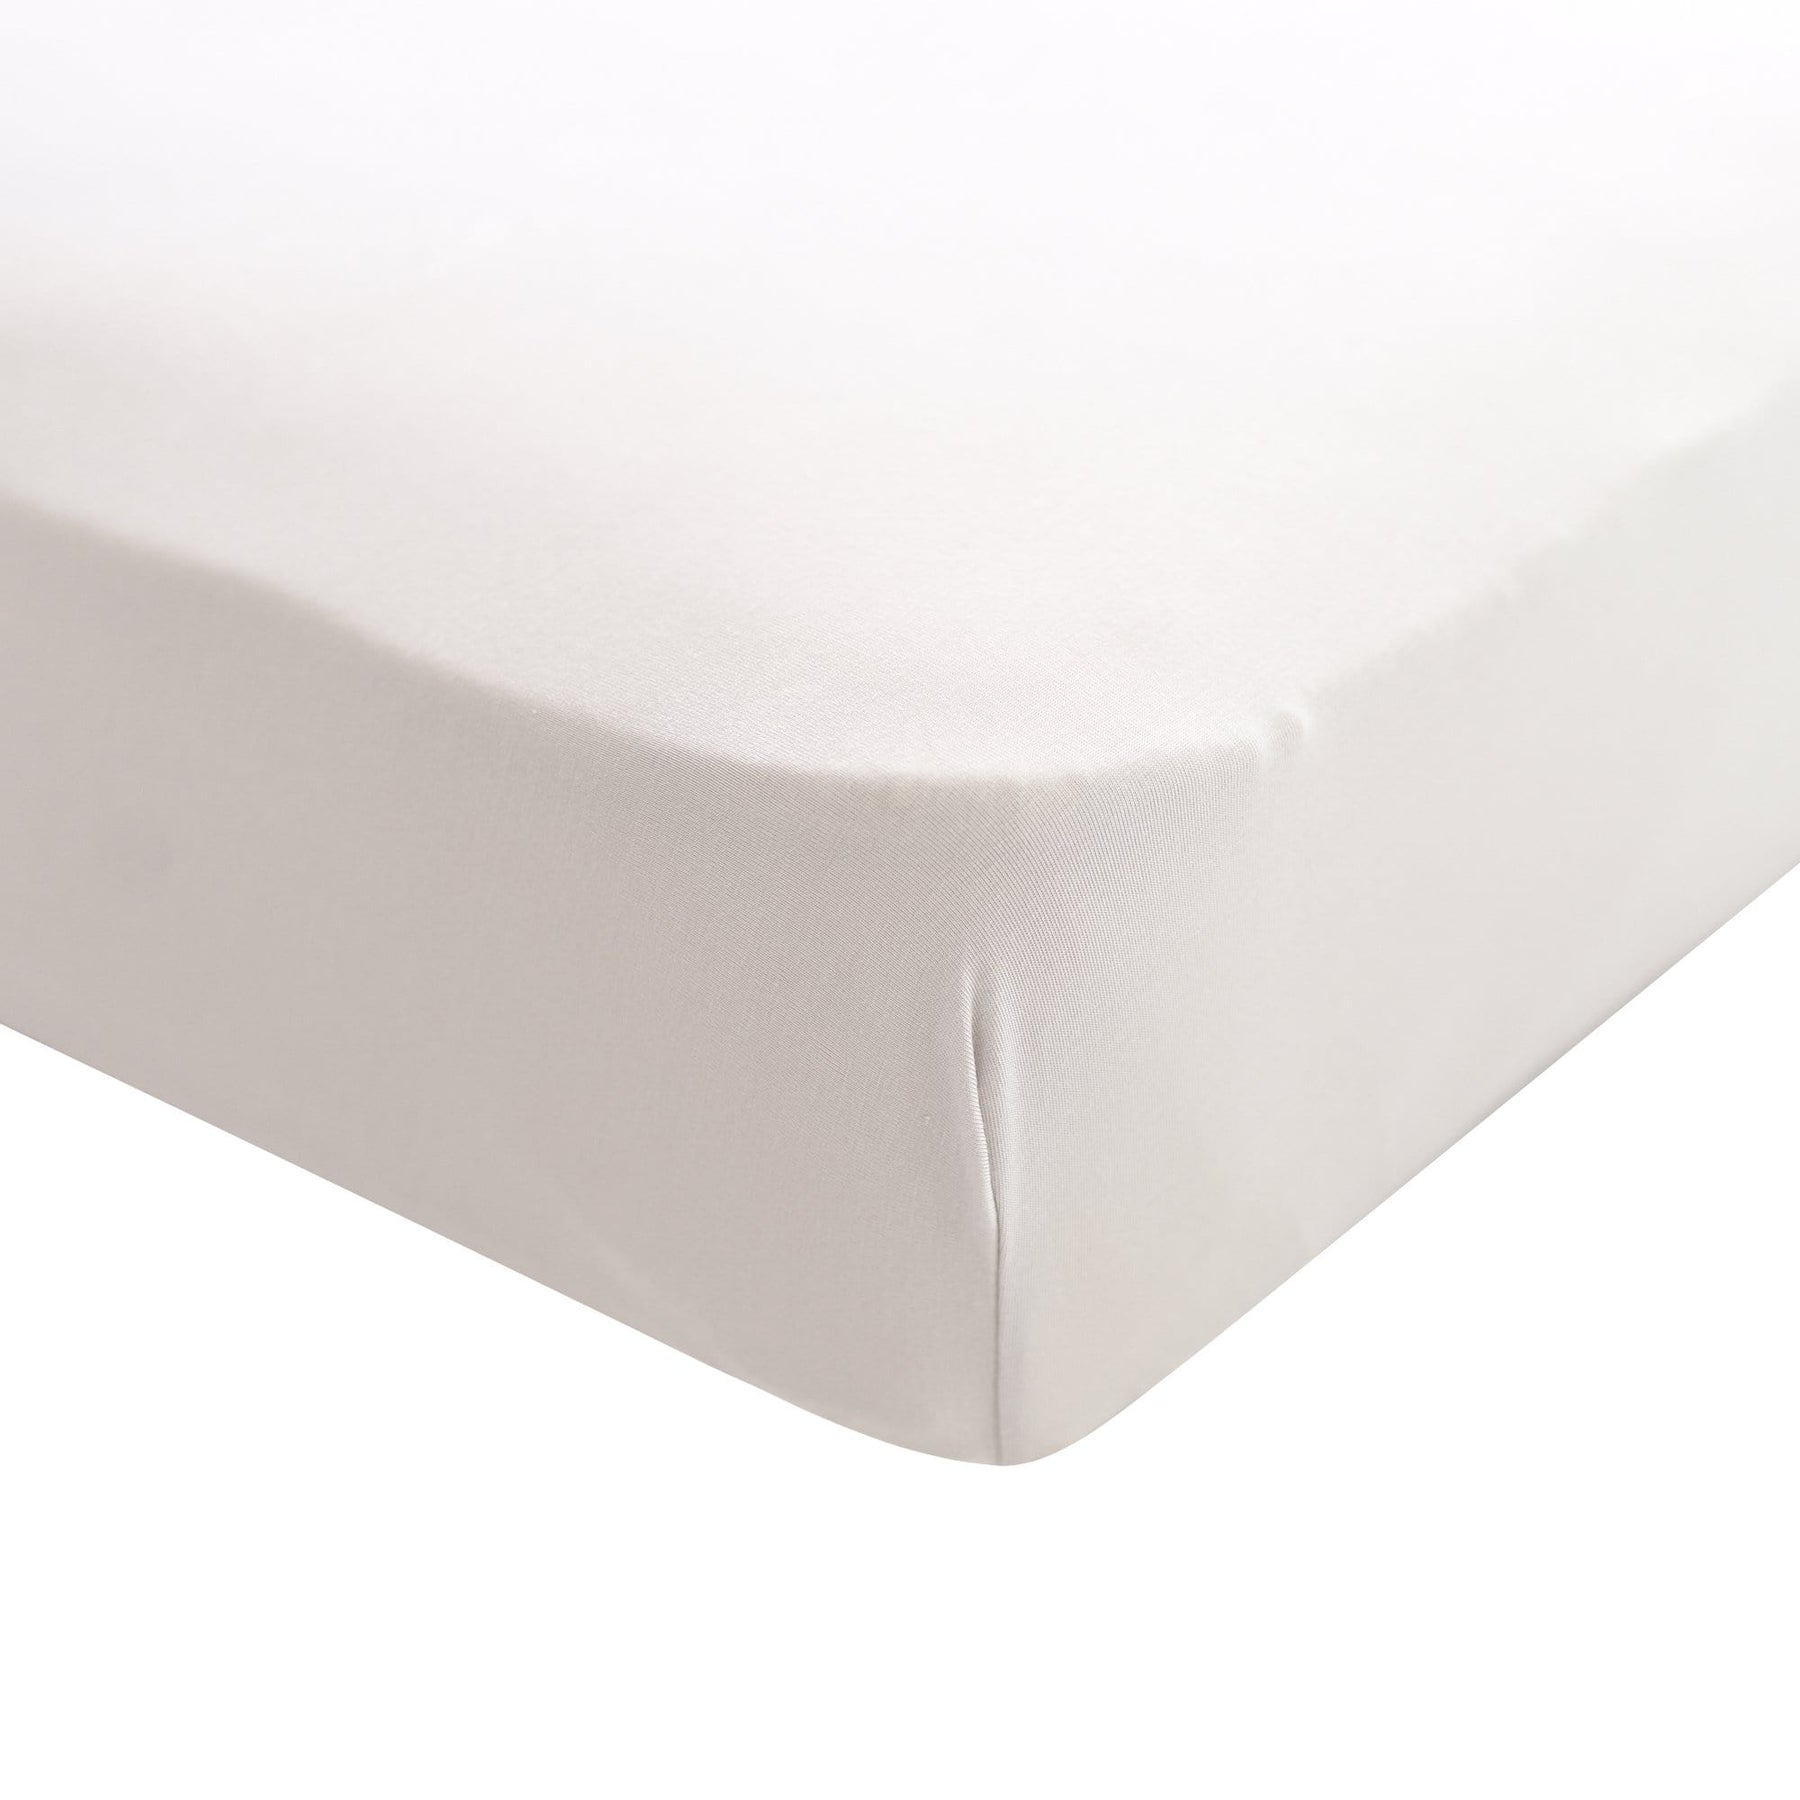 Twin sheet in the color oat shown on a mattress